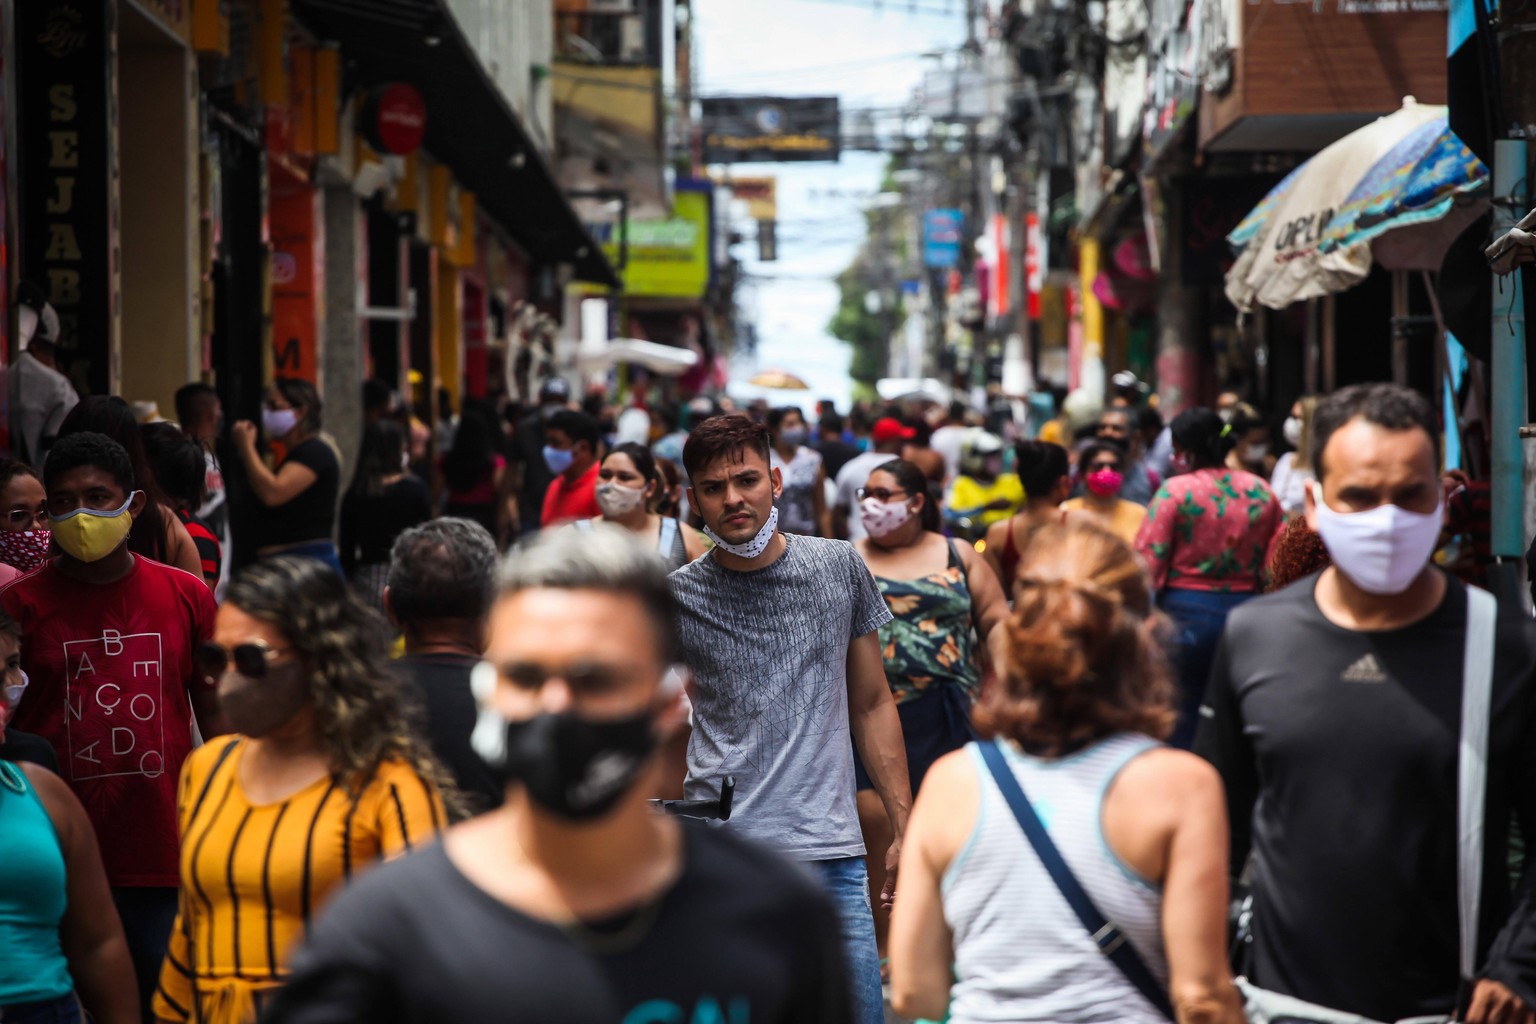 BELM, PA - 04.06.2020: ABERTURA DO COMRCIO EM BELM - Lockdown ends in Par and commerce reopens in Belm with crowded streets and people without a mask, this Thursday Par already has more than 48 thousa ...